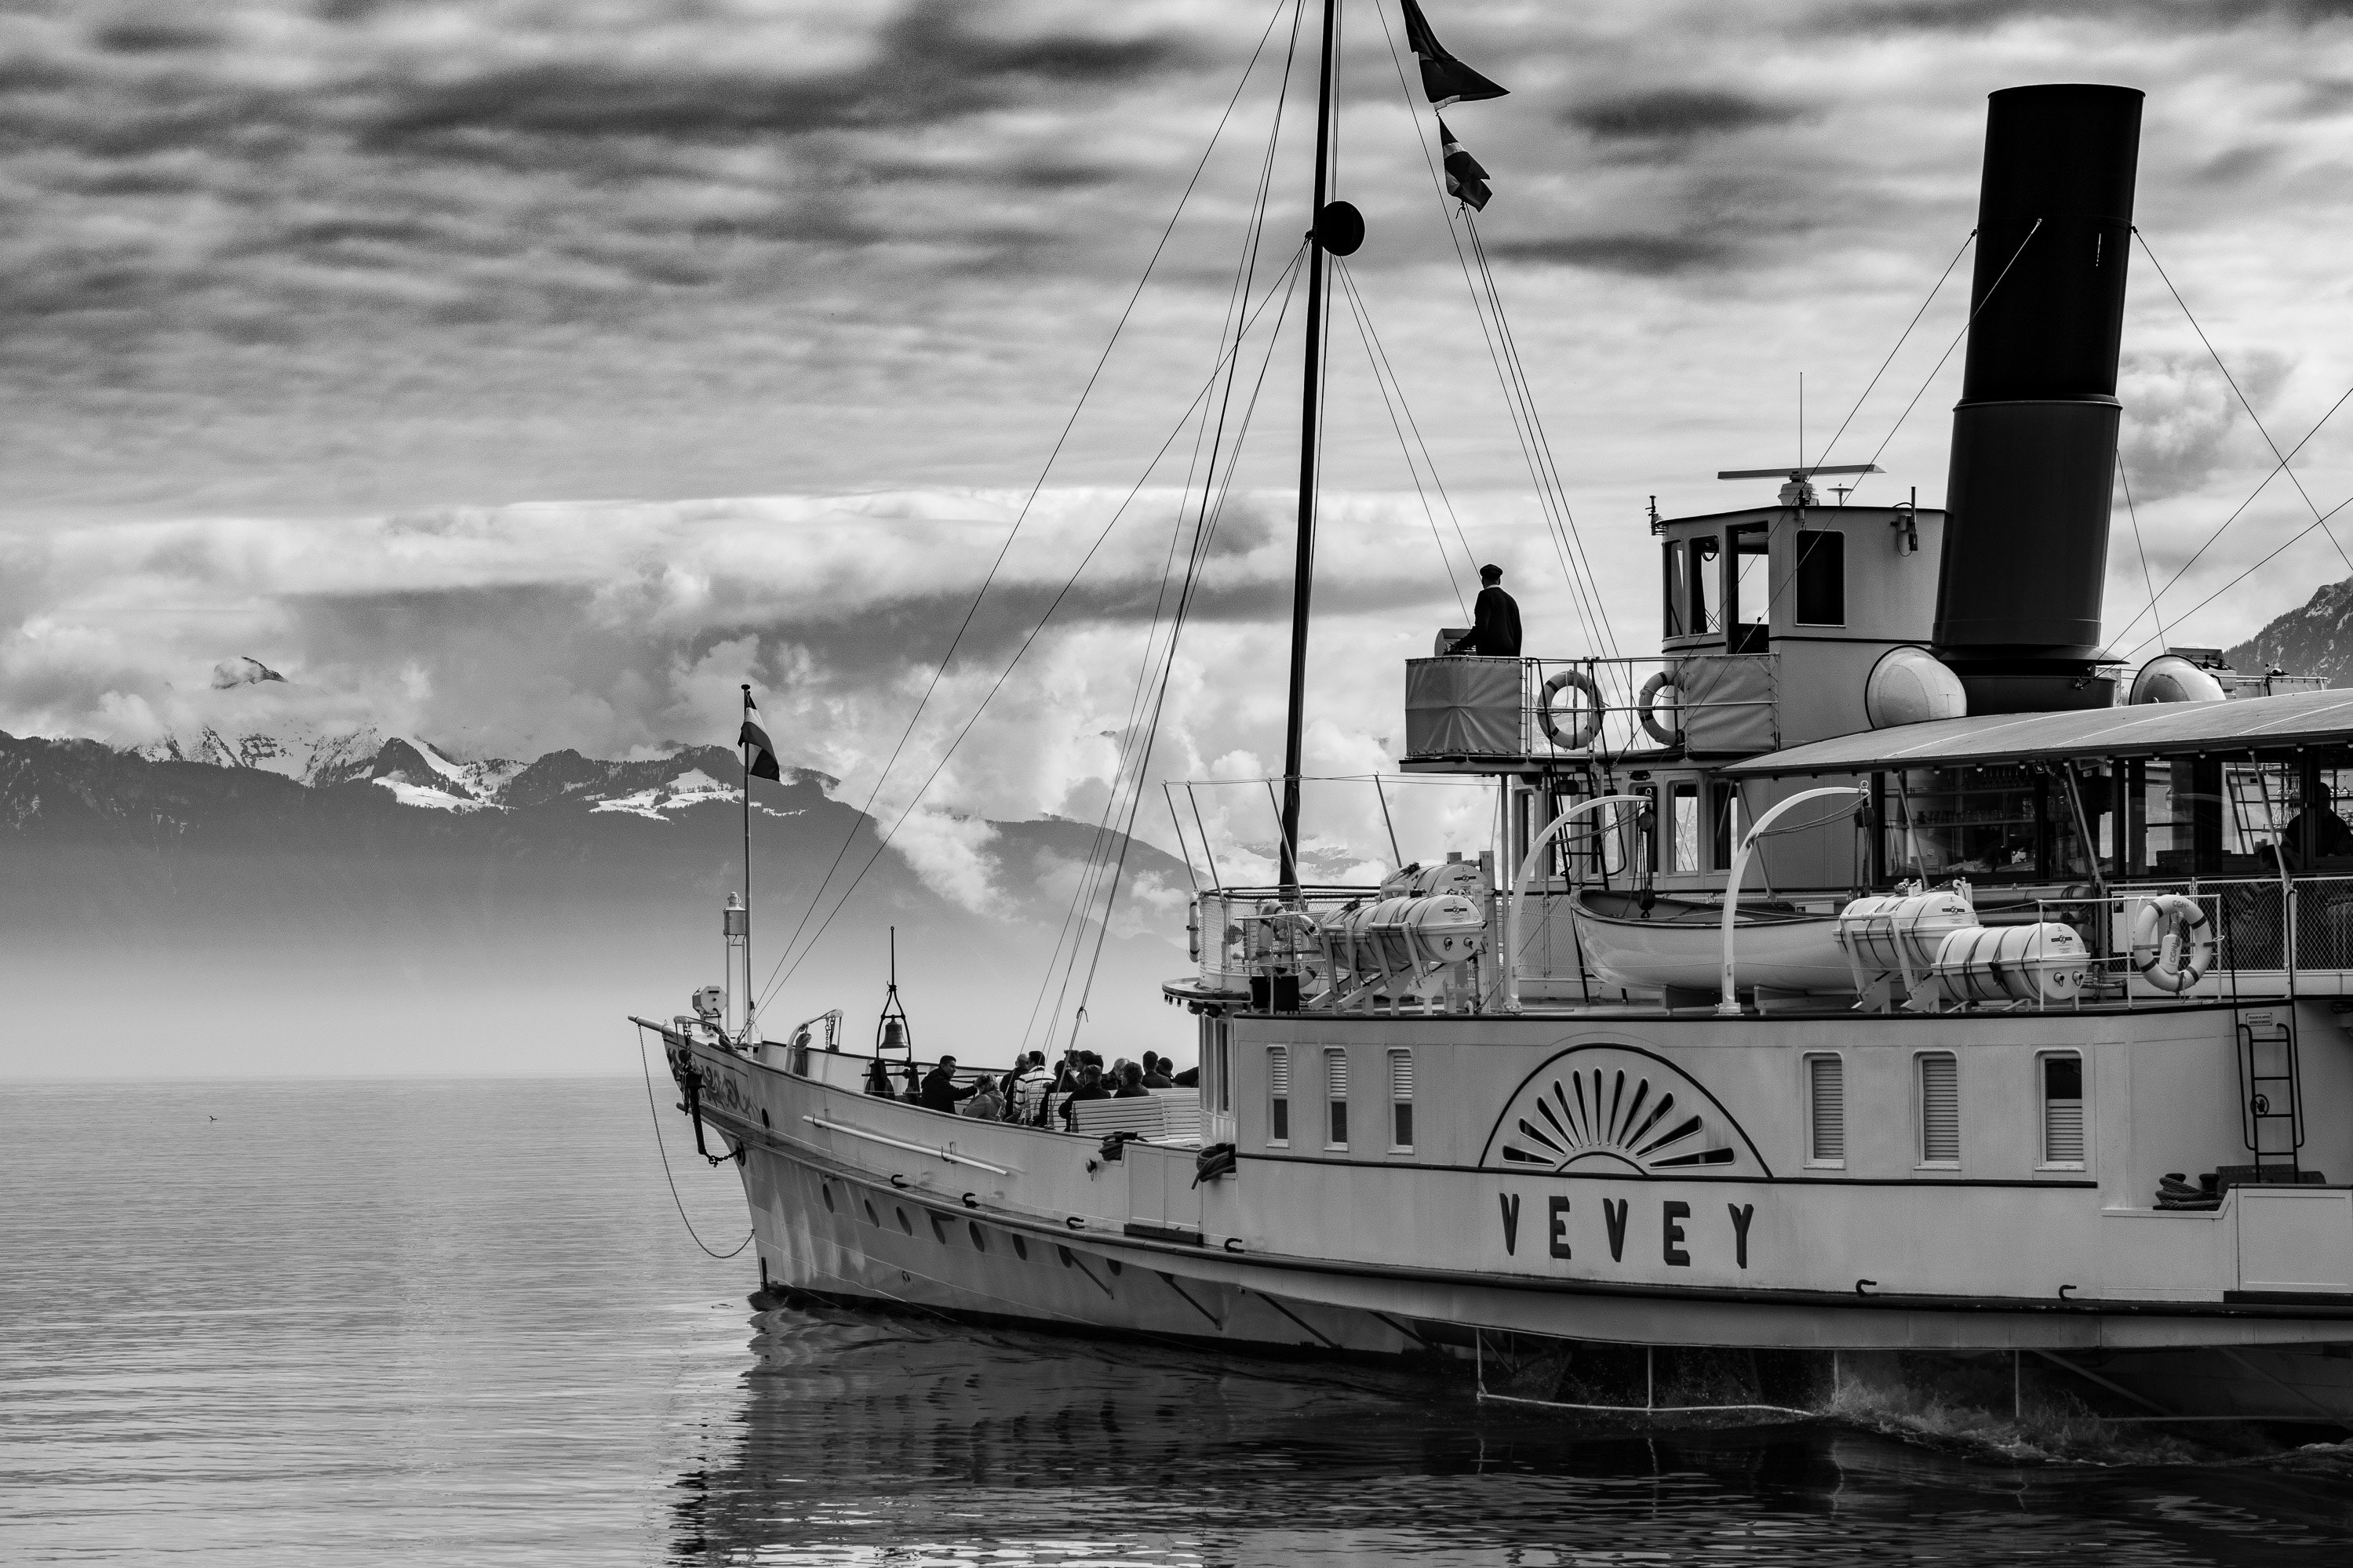 Grayscale photography of yevey sail boat